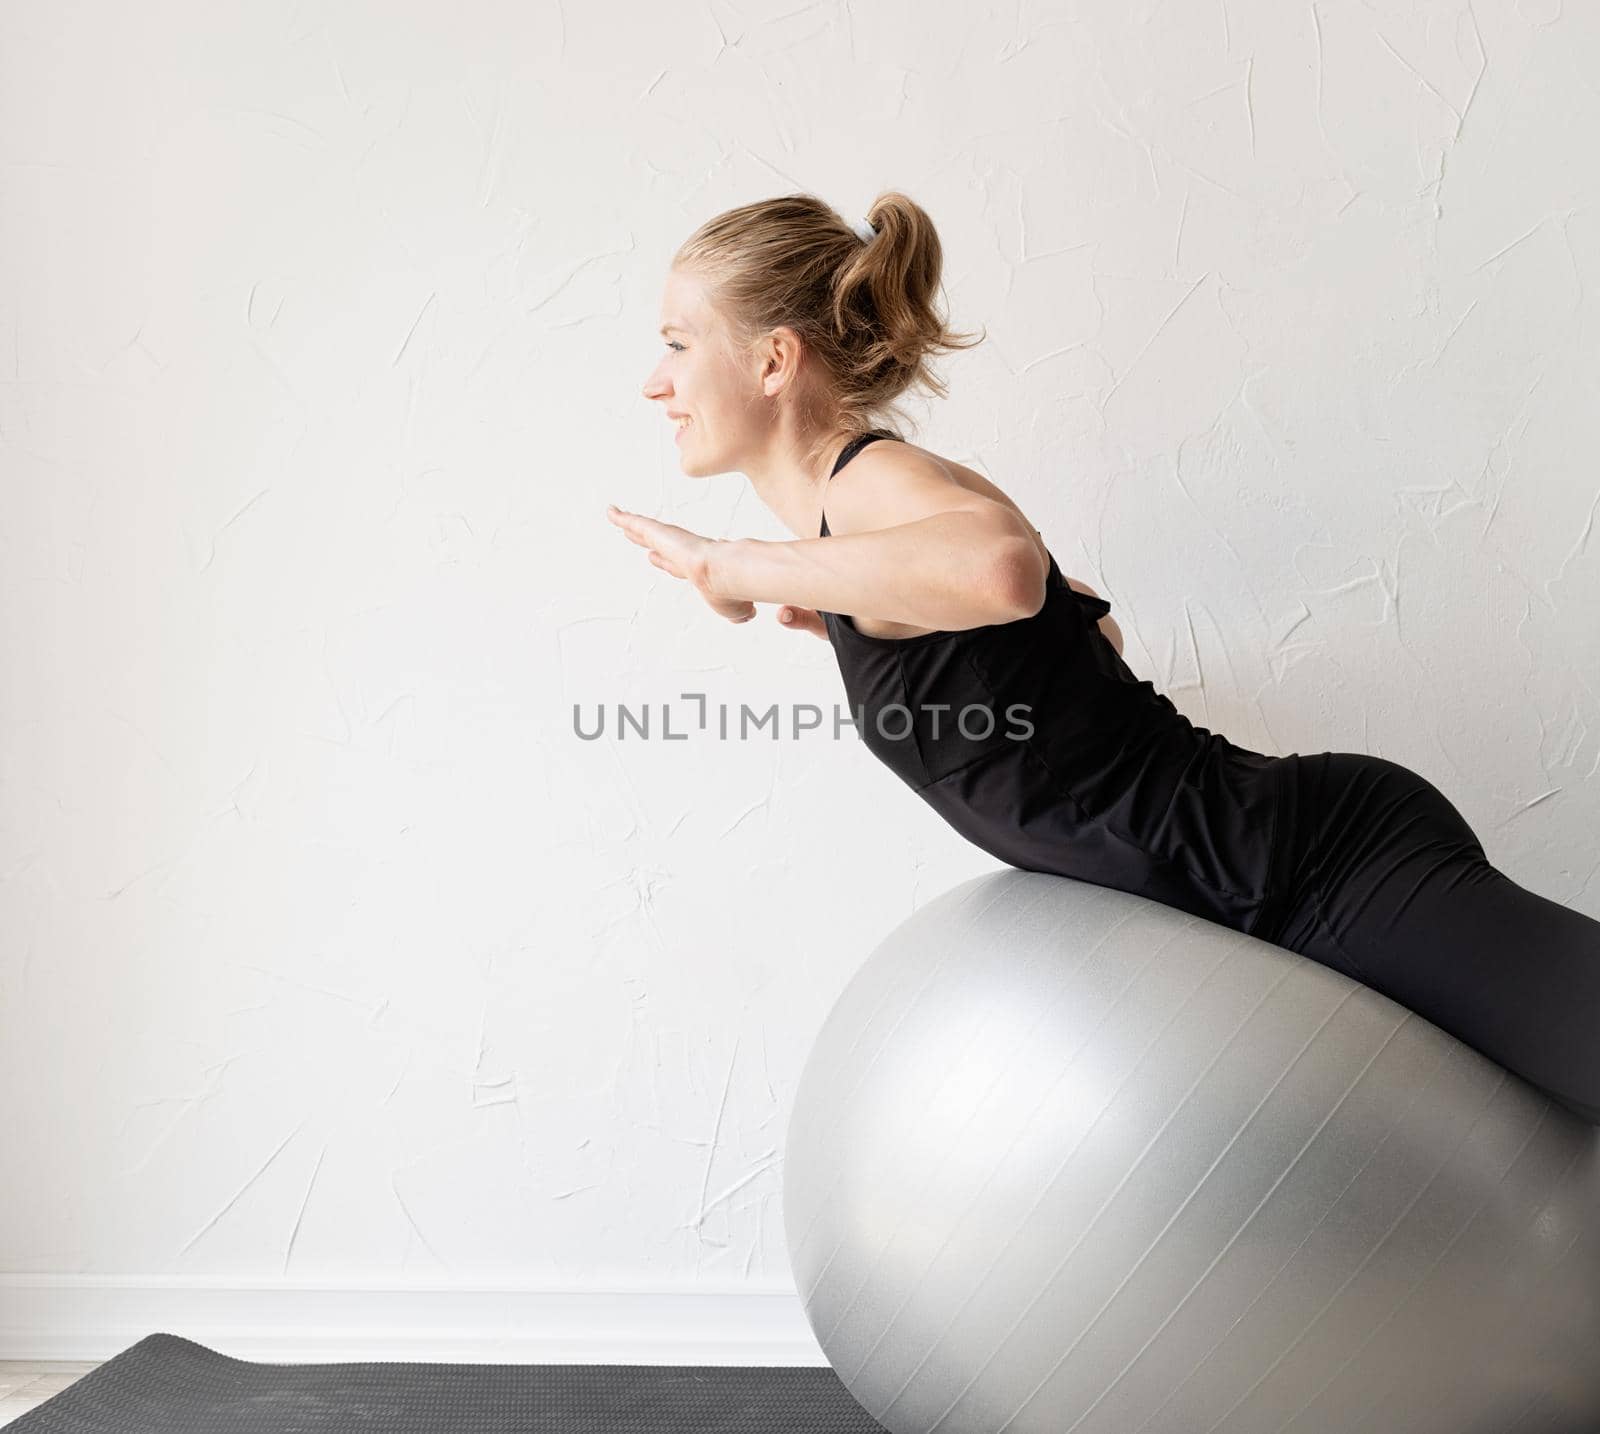 Sport and healthy lifestyle concept. Young smiling sportive woman working out on the fitness ball training her back